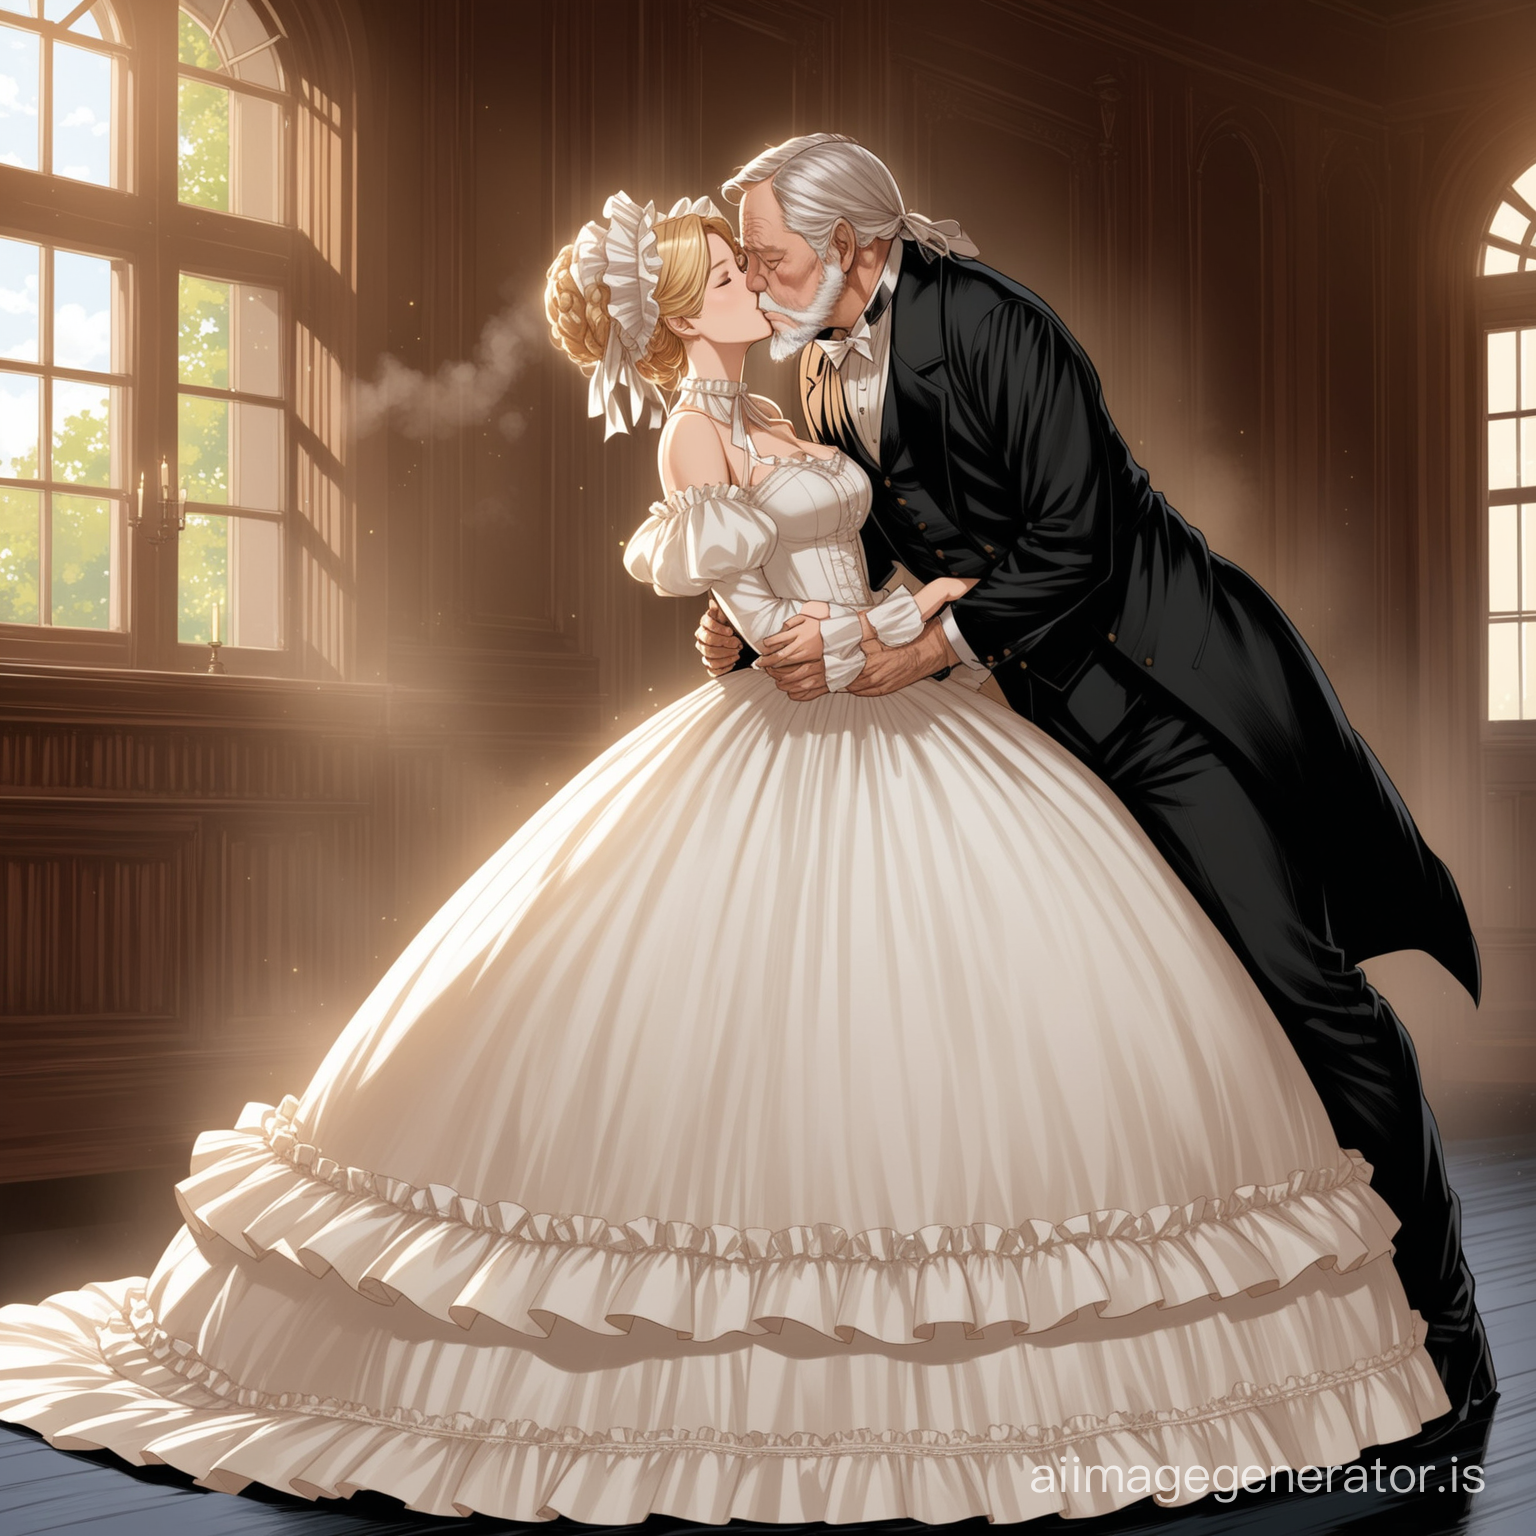 Sue Storm wearing a black floor-length loose billowing 1860 Victorian crinoline poofy dress with a frilly bonnet in a Victorian era mansion kissing passionetely an old man dressed into a black Victorian suit who seems to be her newlywed husband